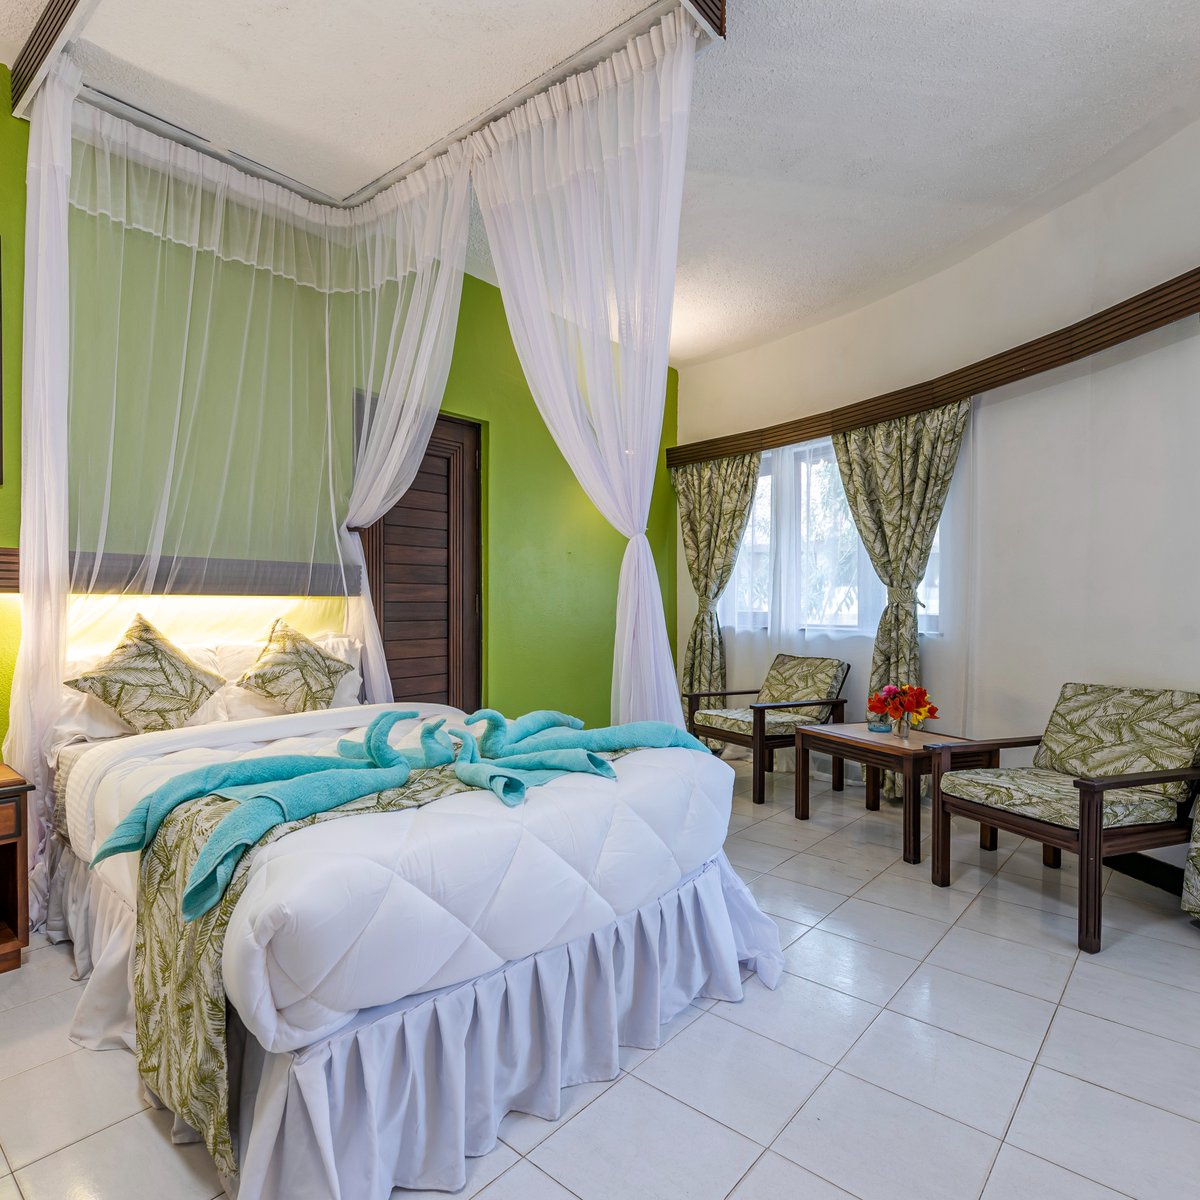 Book your stay from as low as Kes 6,800 per person sharing on half board.
#safaribeachdiani #safaribeachhotel #beachlife #beachhotel #diani #specialoffer #specialrates #hotelroom #accommodation #corporate #couples #families #dianibeachkenya #staycation #vacation